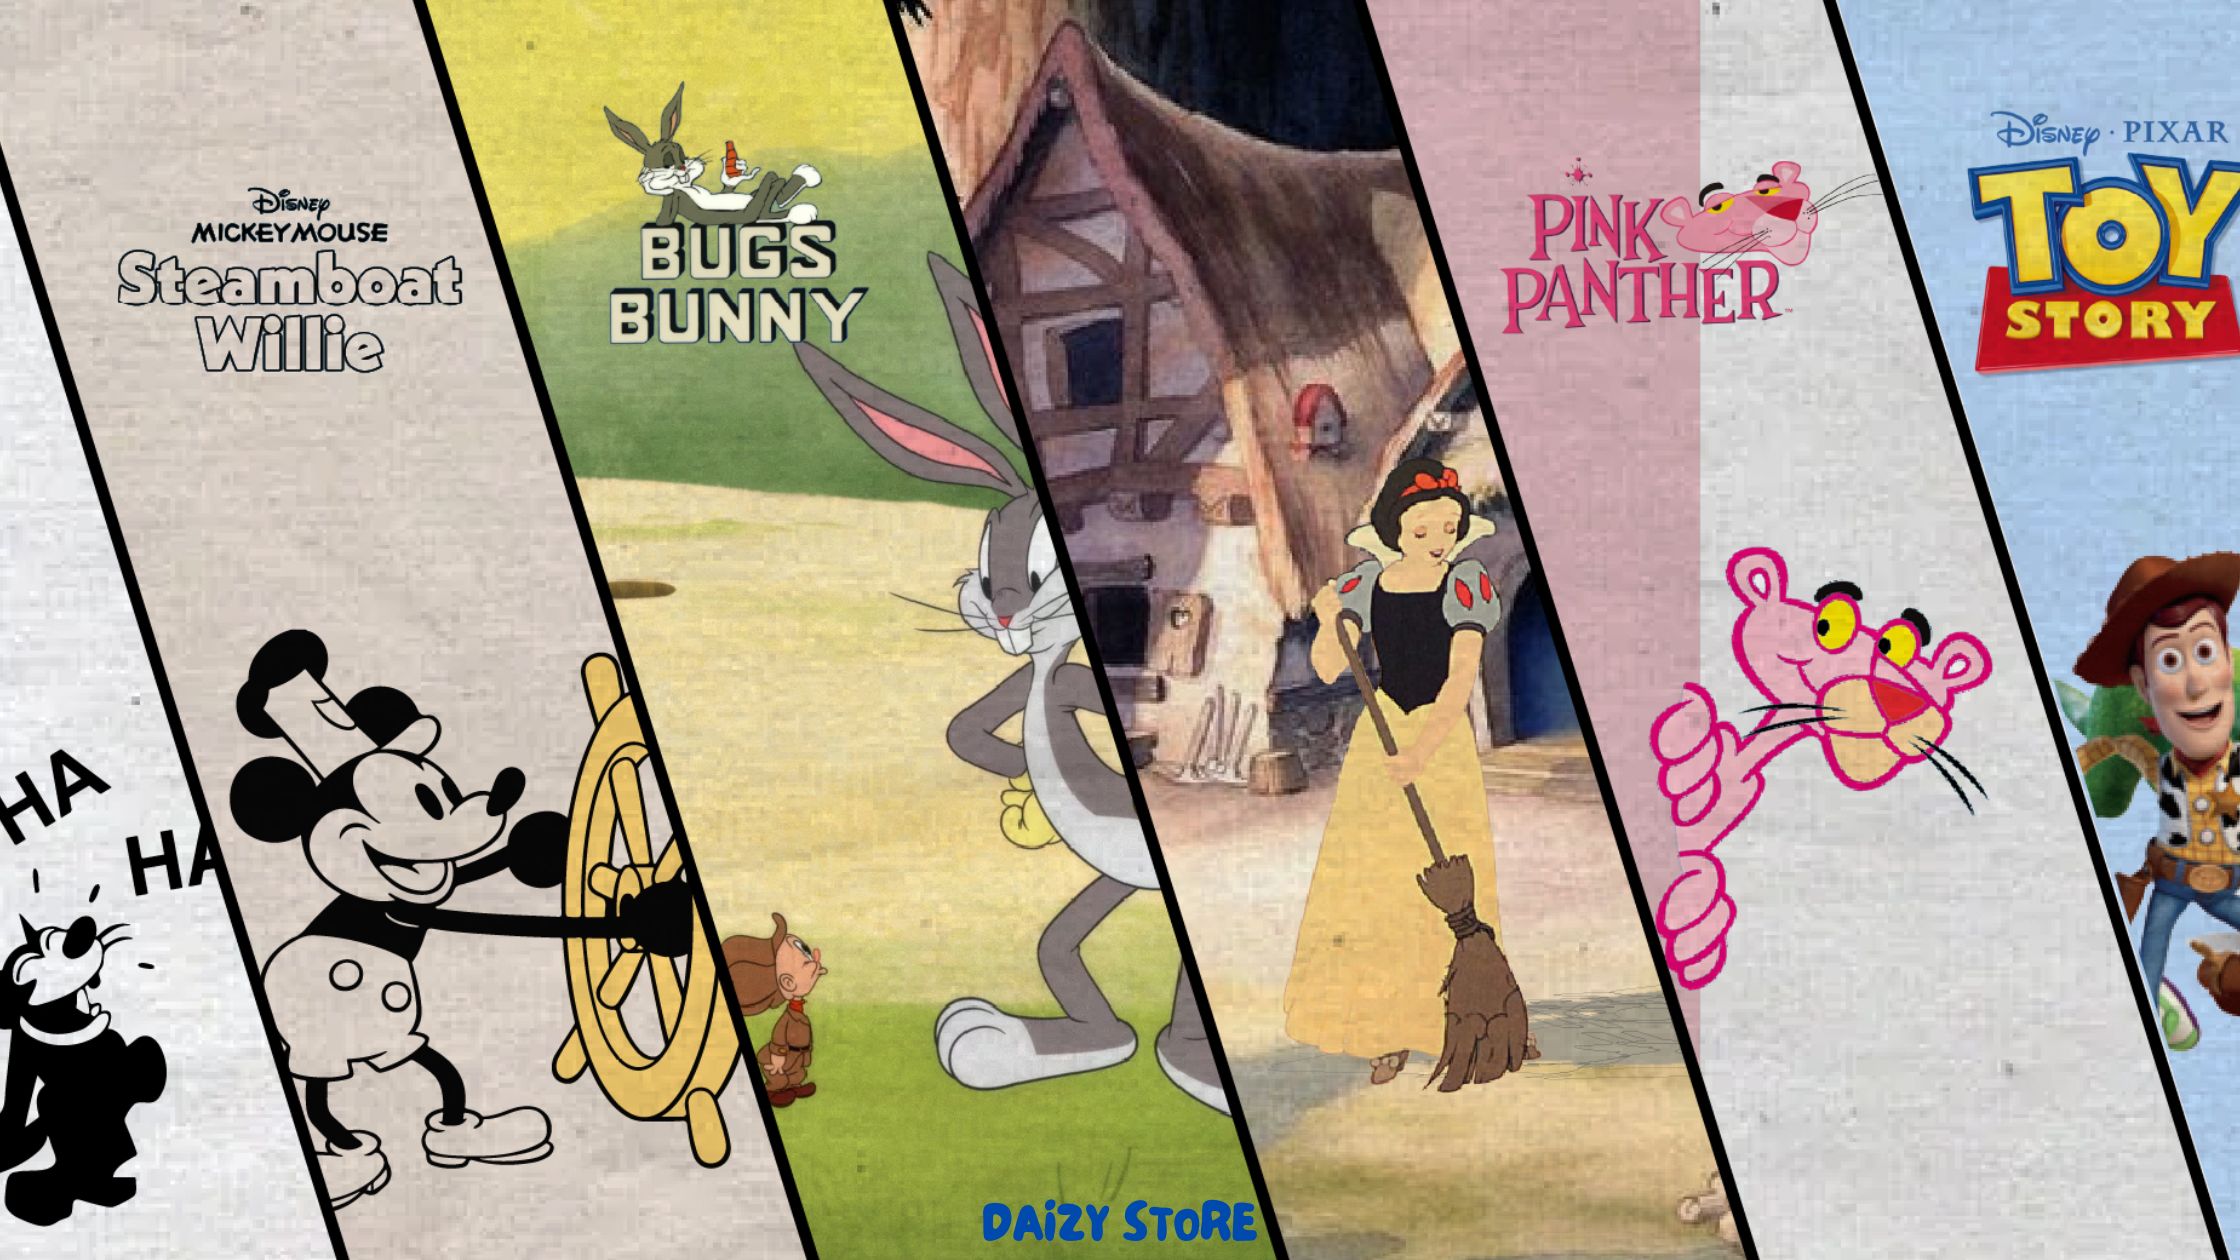 Golden Age of Animation